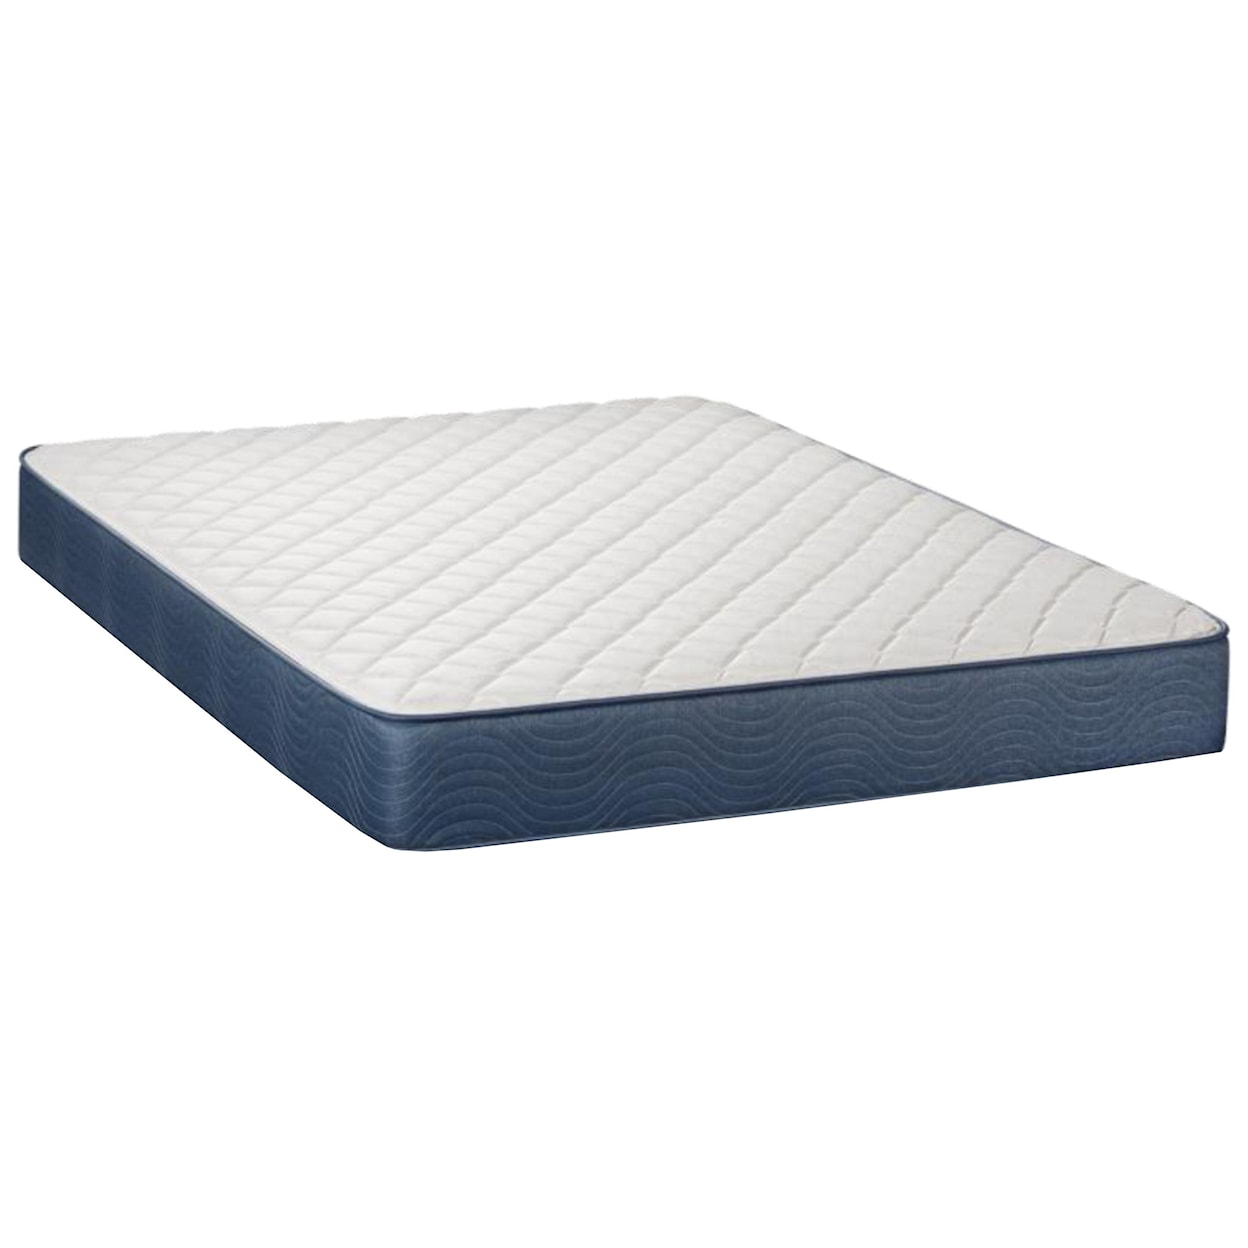 Restonic Sumner Firm Queen 9" Firm Two Sided Mattress